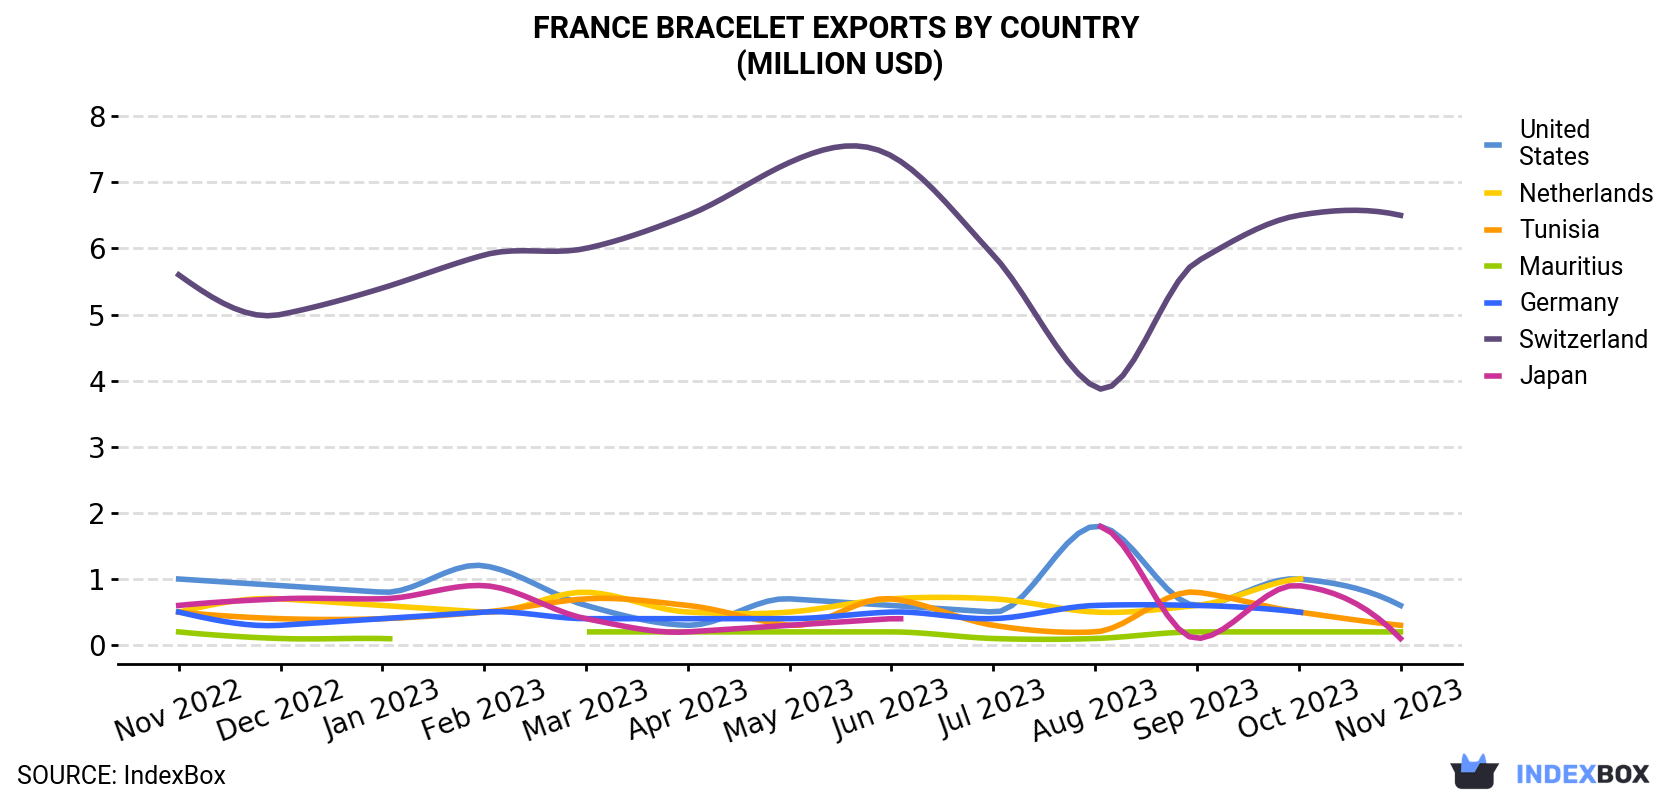 France Bracelet Exports By Country (Million USD)